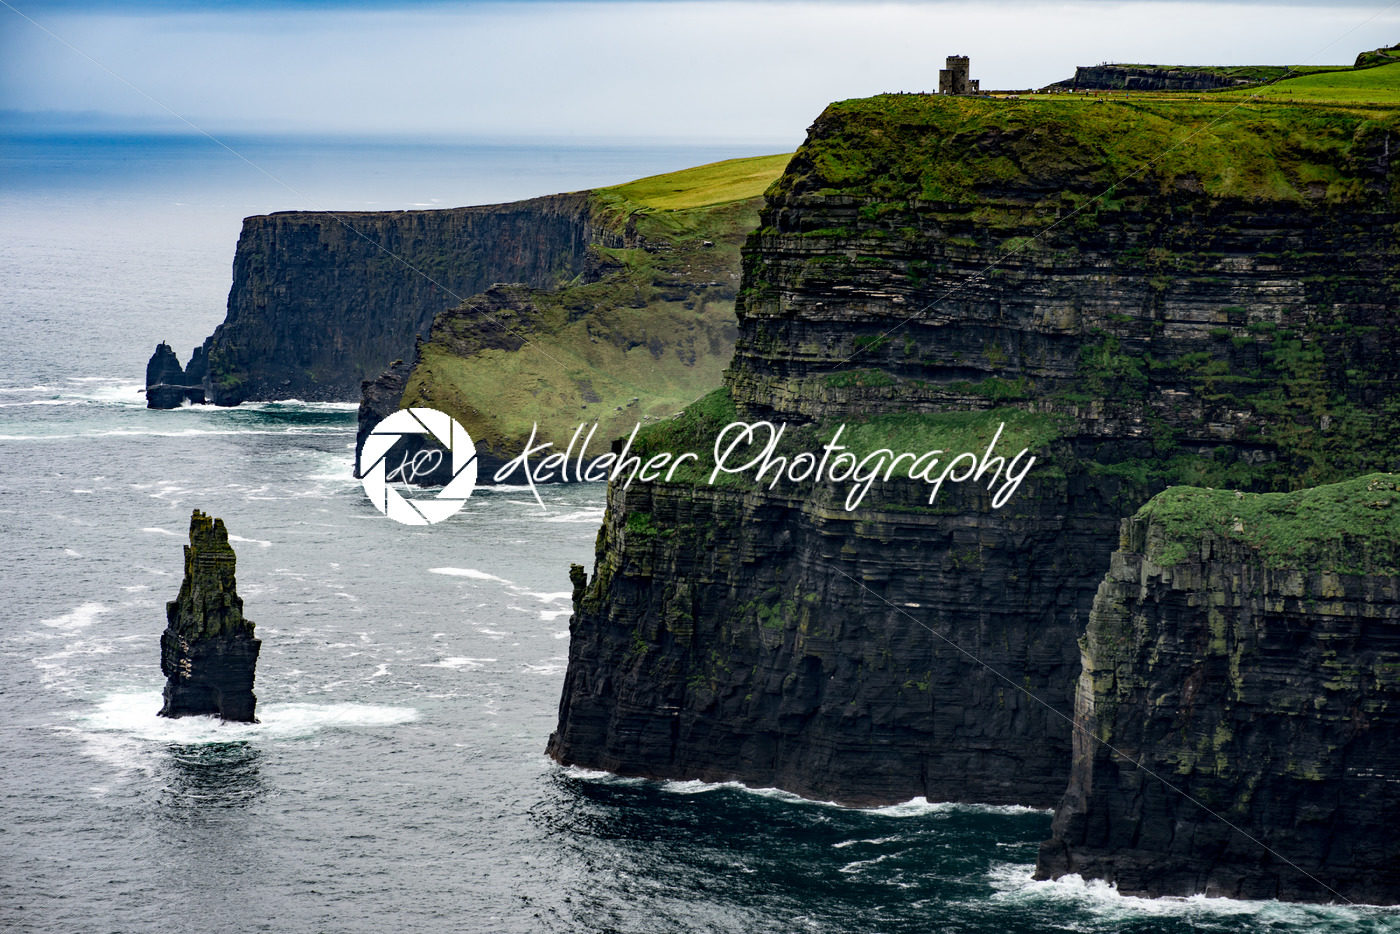 Cliffs of Moher Tourist Attraction in Ireland - Kelleher Photography Store